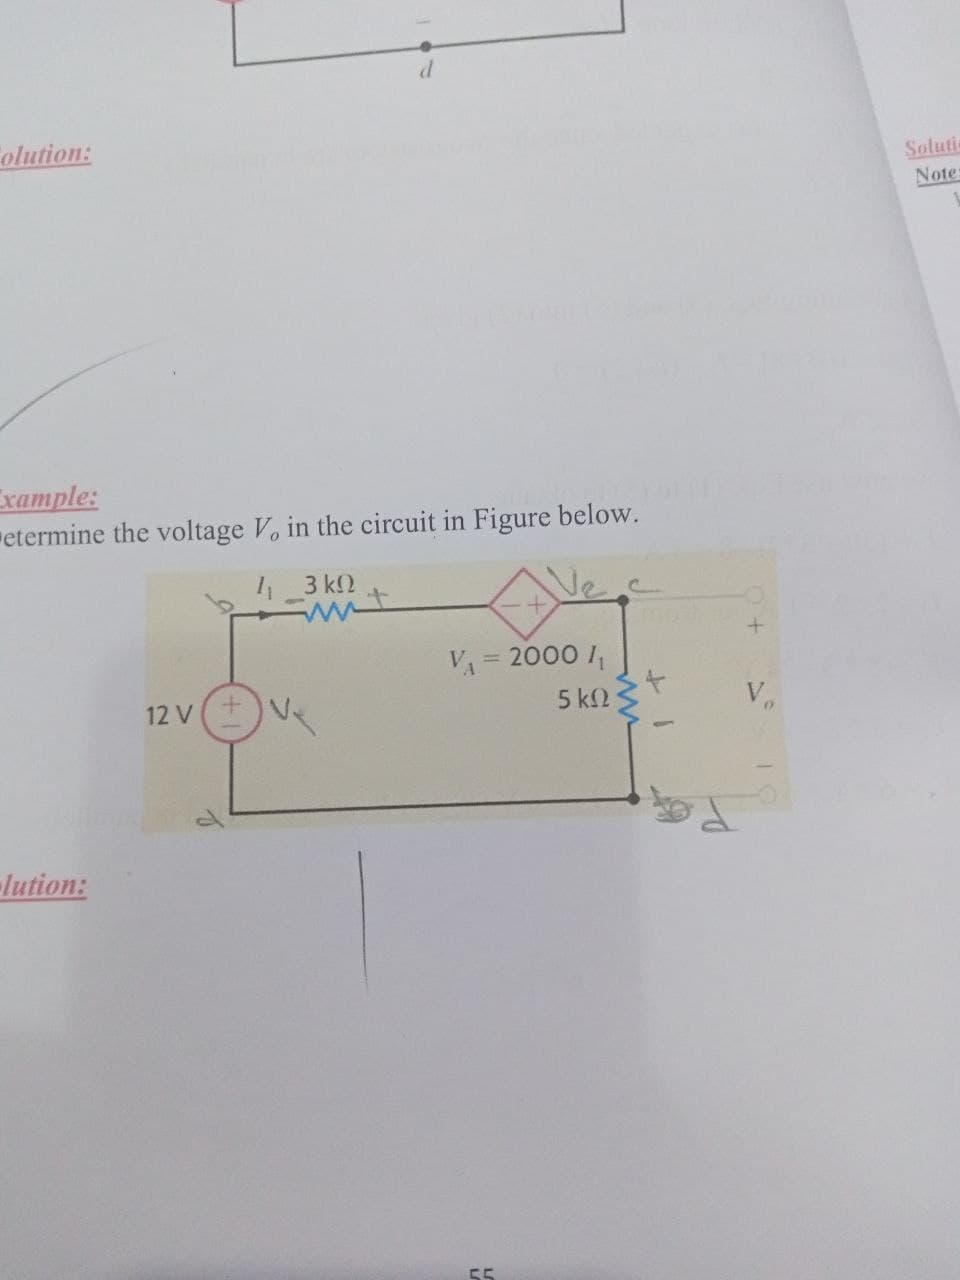 olution:
Soluti
Note:
Example:
etermine the voltage Vo in the circuit in Figure below.
4 3 k2
VA= 2000 I,
%3D
12 V
5 k2
V.
lution:
55
